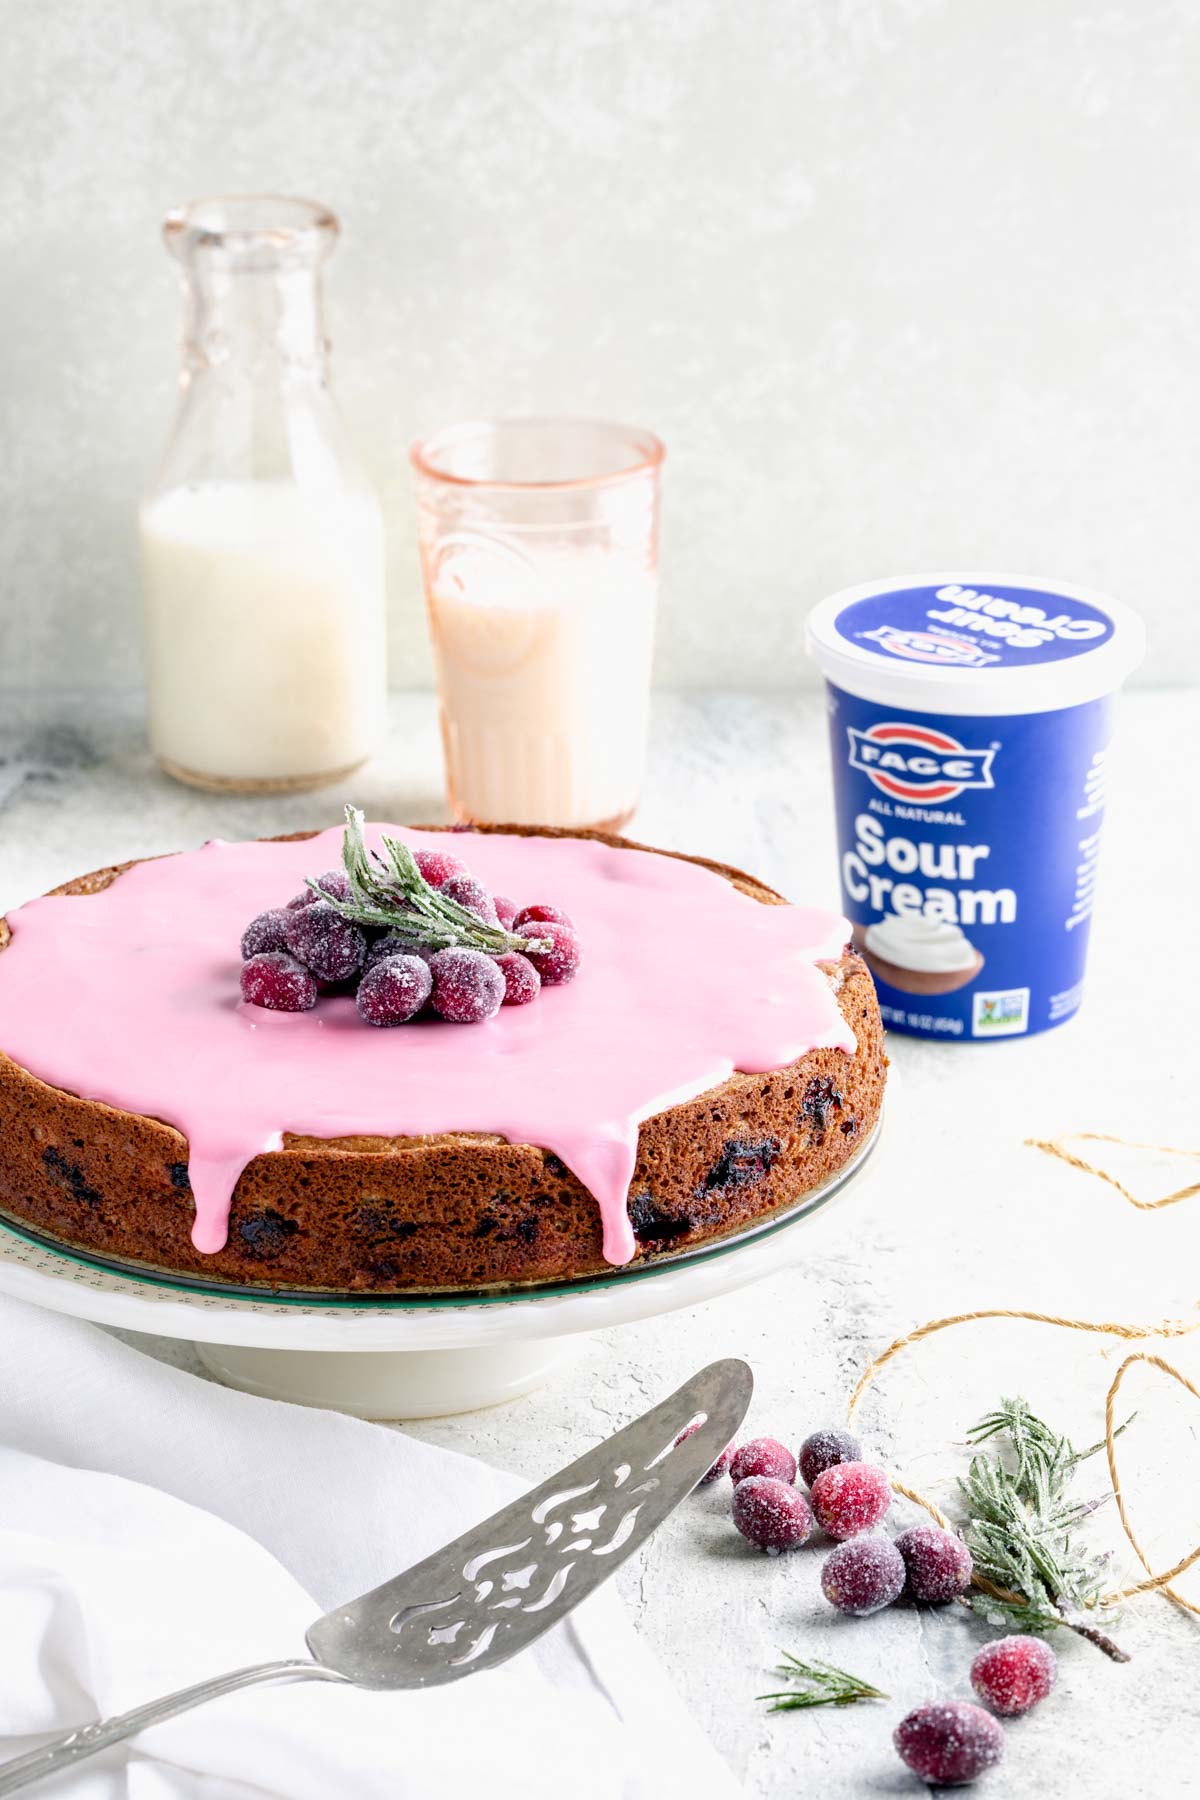 Cranberry cake and a container of FAGE sour cream on a white table